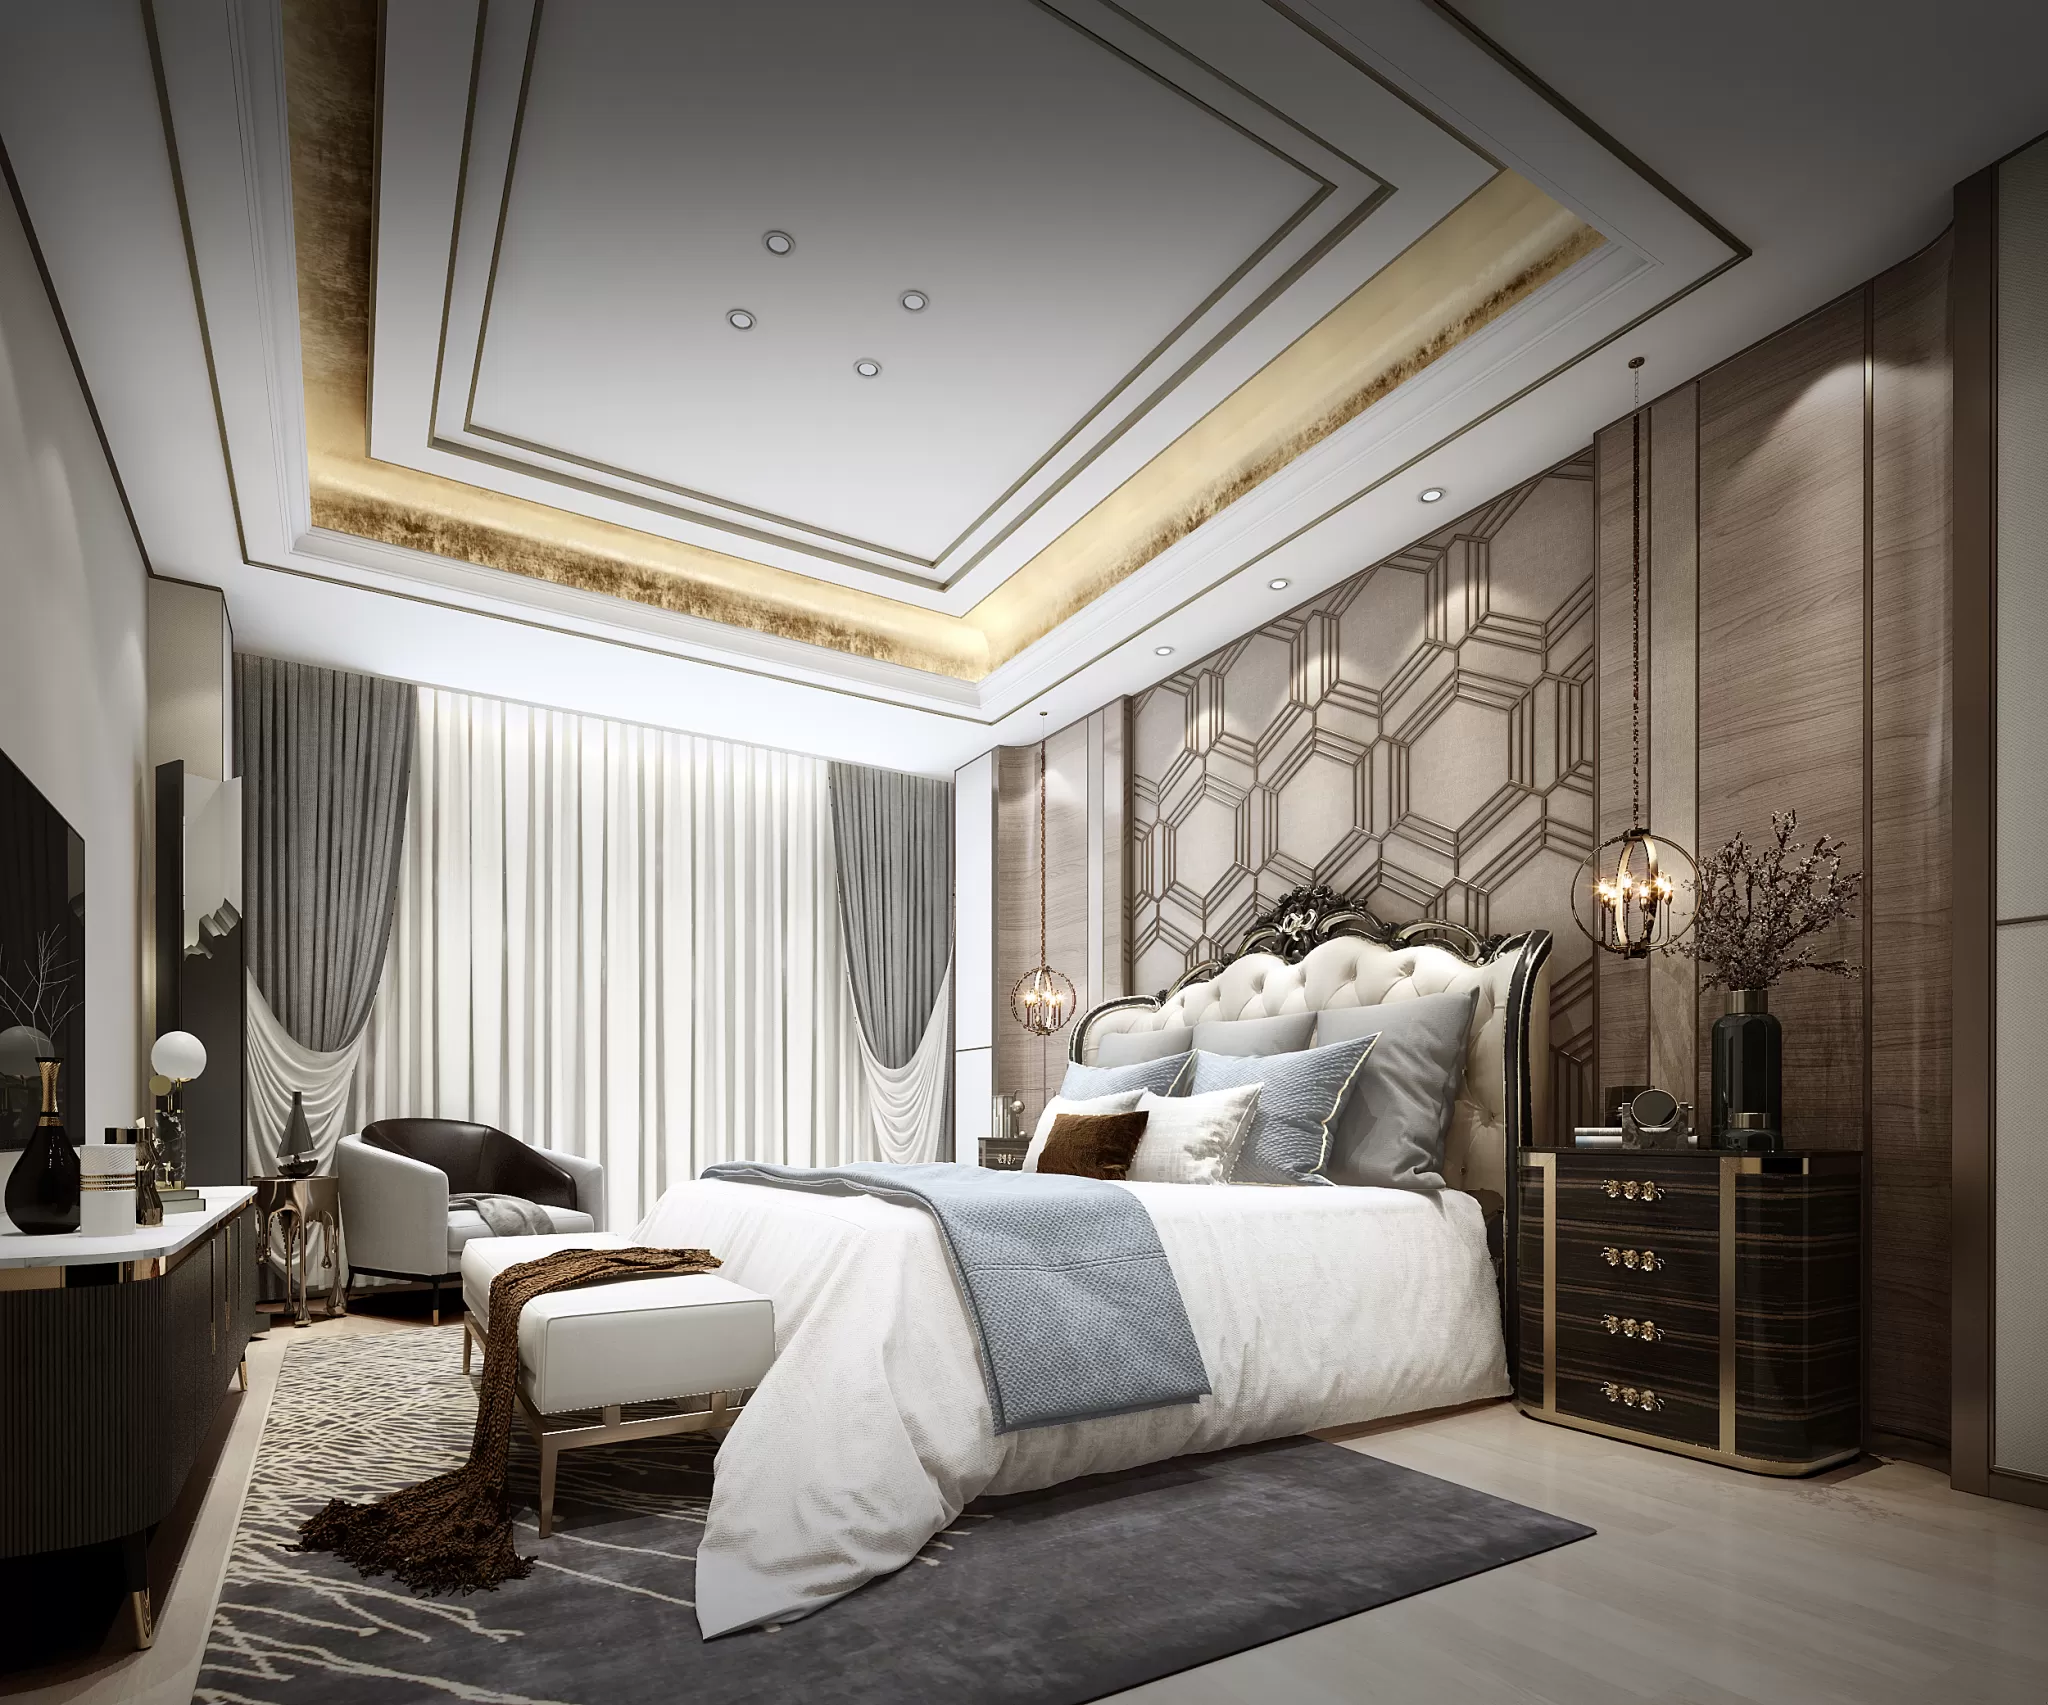 DESMOD INTERIOR 2021 (VRAY)/5. BEDROOM – 2. CHINESE STYLES – 154